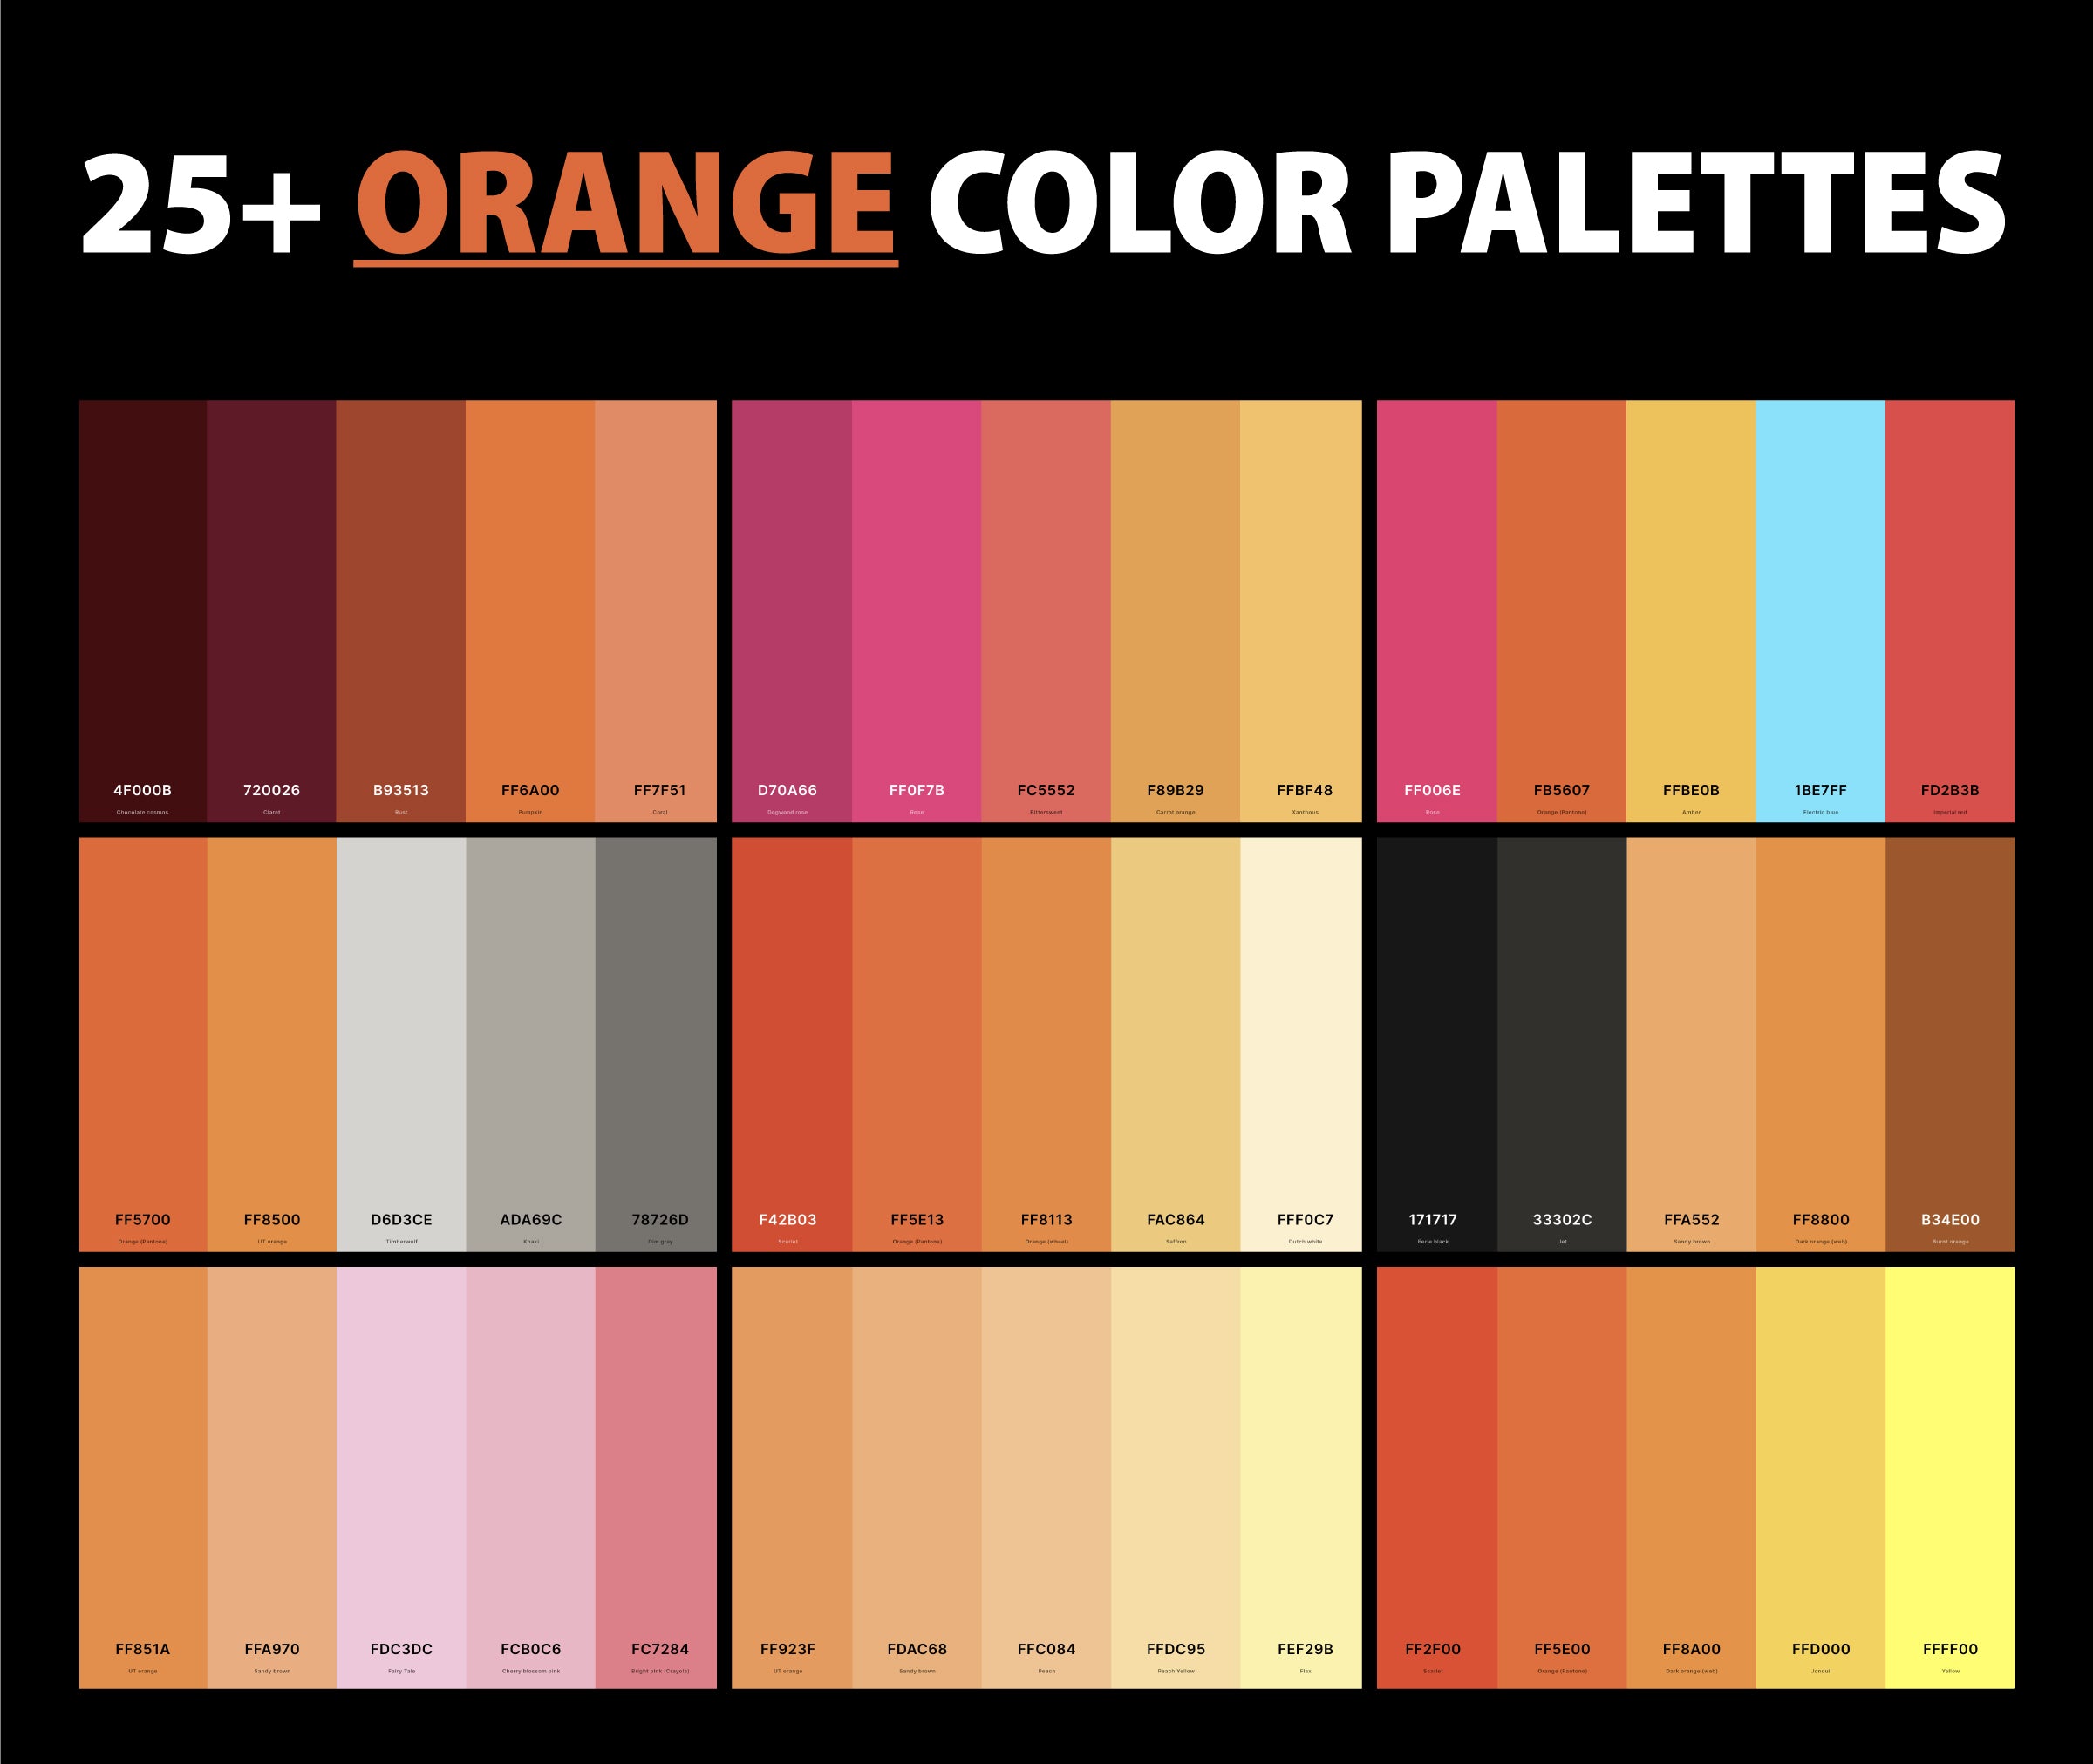 15 Orange Color Palette Inspirations with Names & hex Codes! – Inside Colors